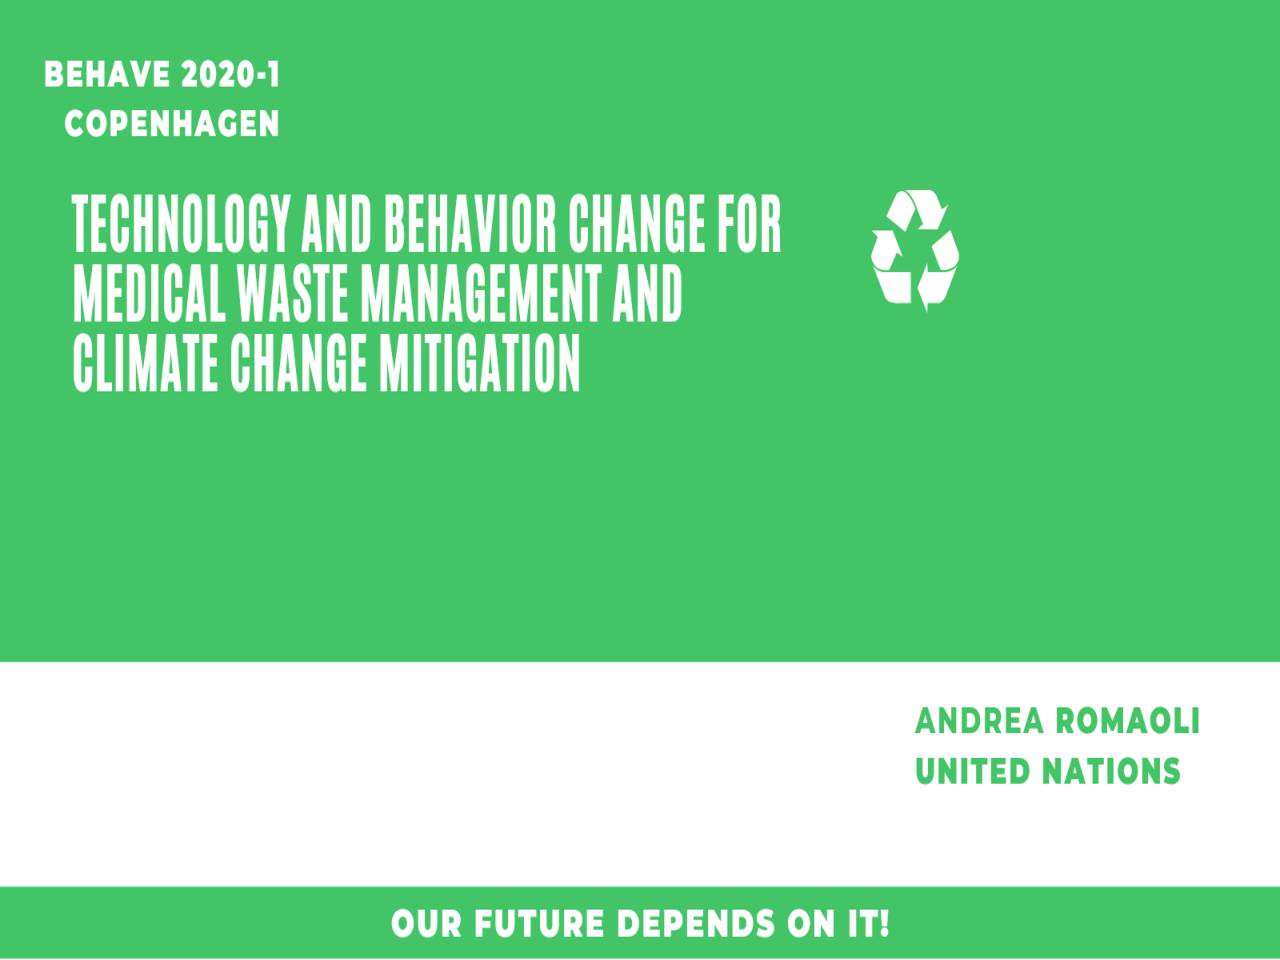 Technology and behaviour change for medical waste management and climate change mitigation